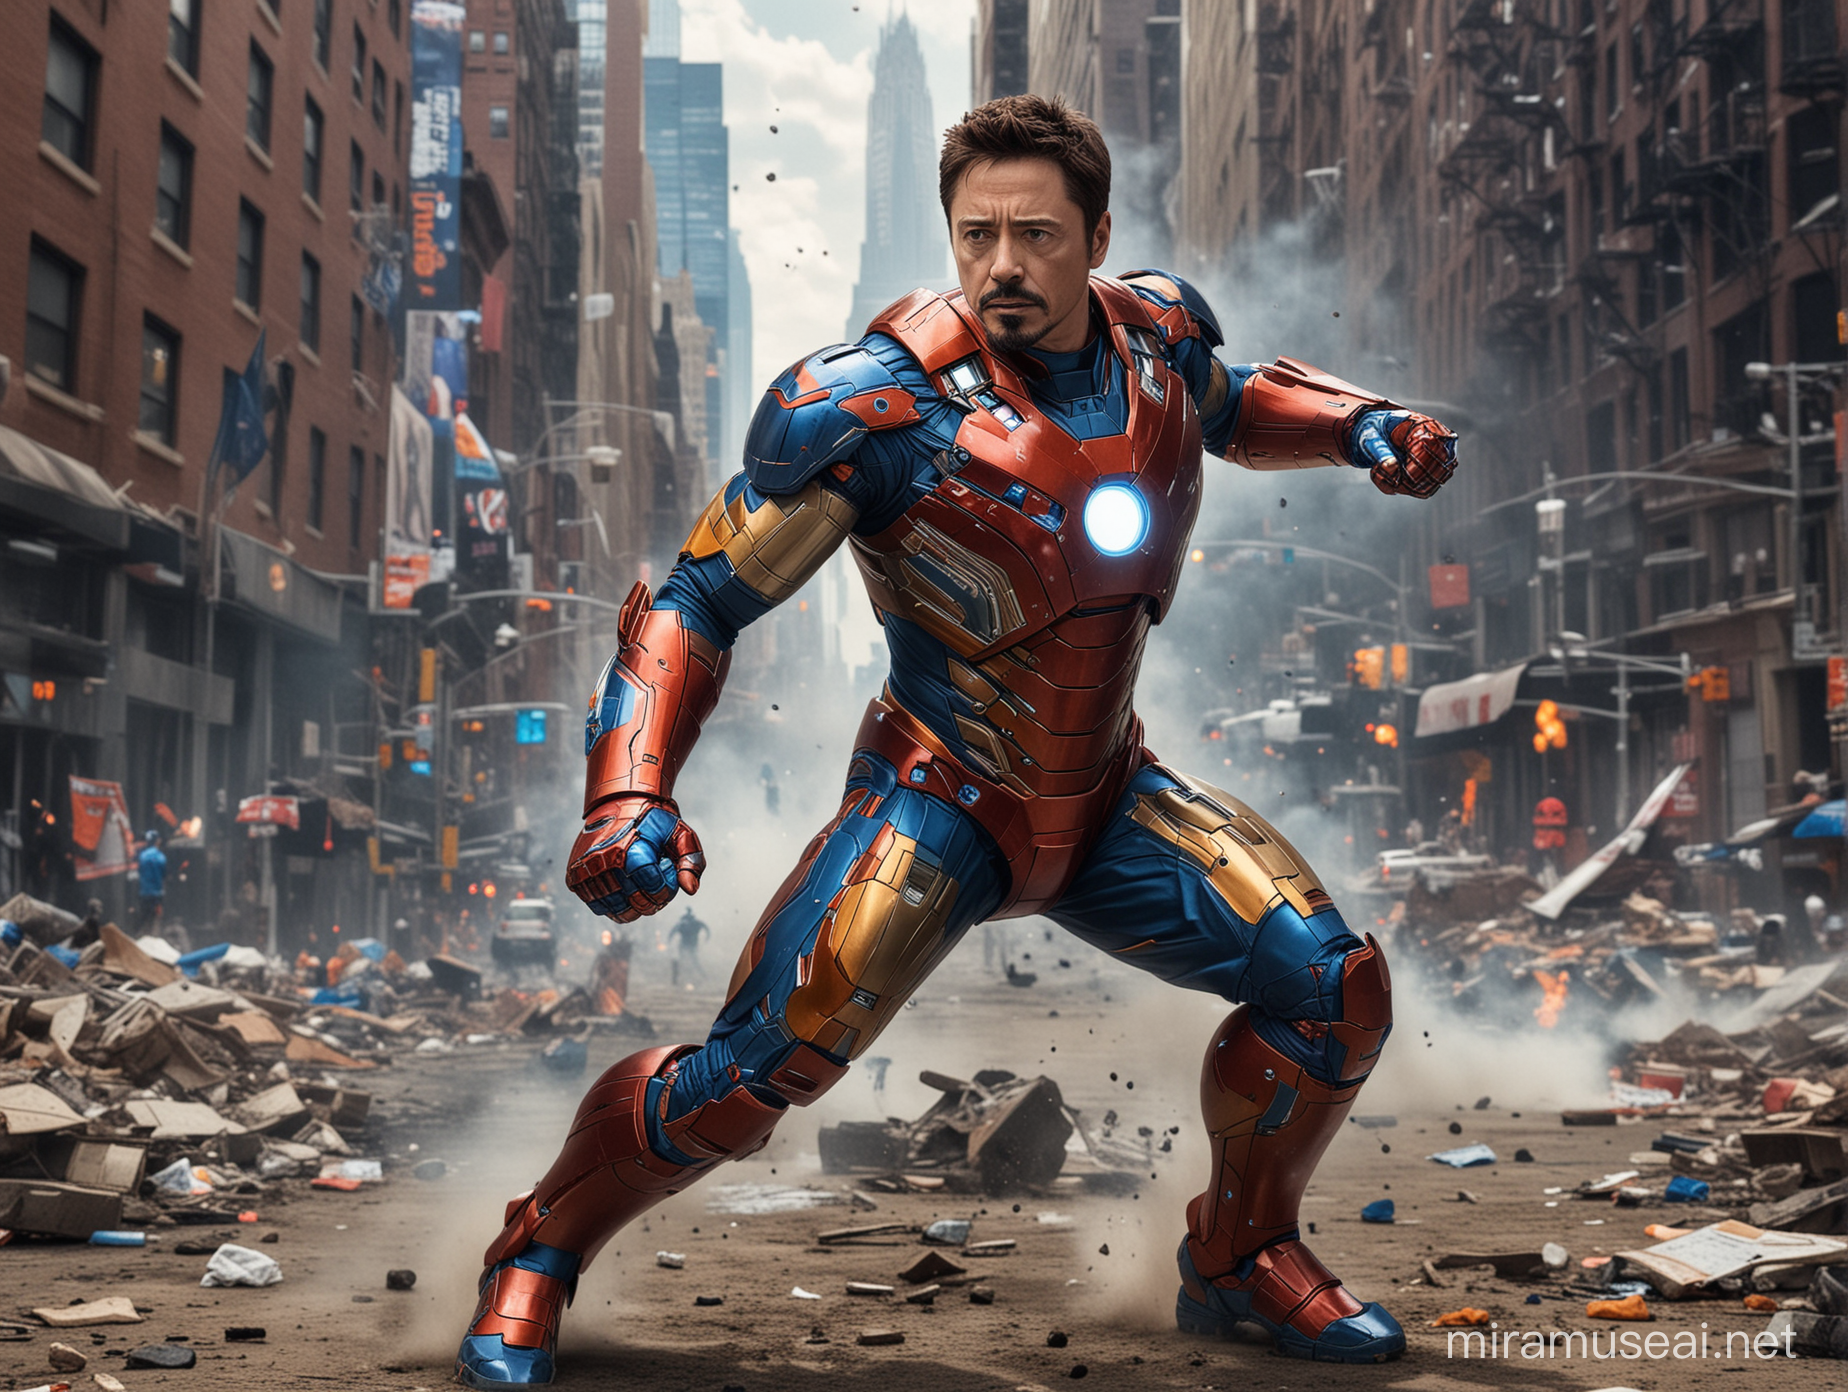 Tony Stark as Ironman doing heroic things. The Ironman suit is the orange, blue and white colors of the New York Mets. 